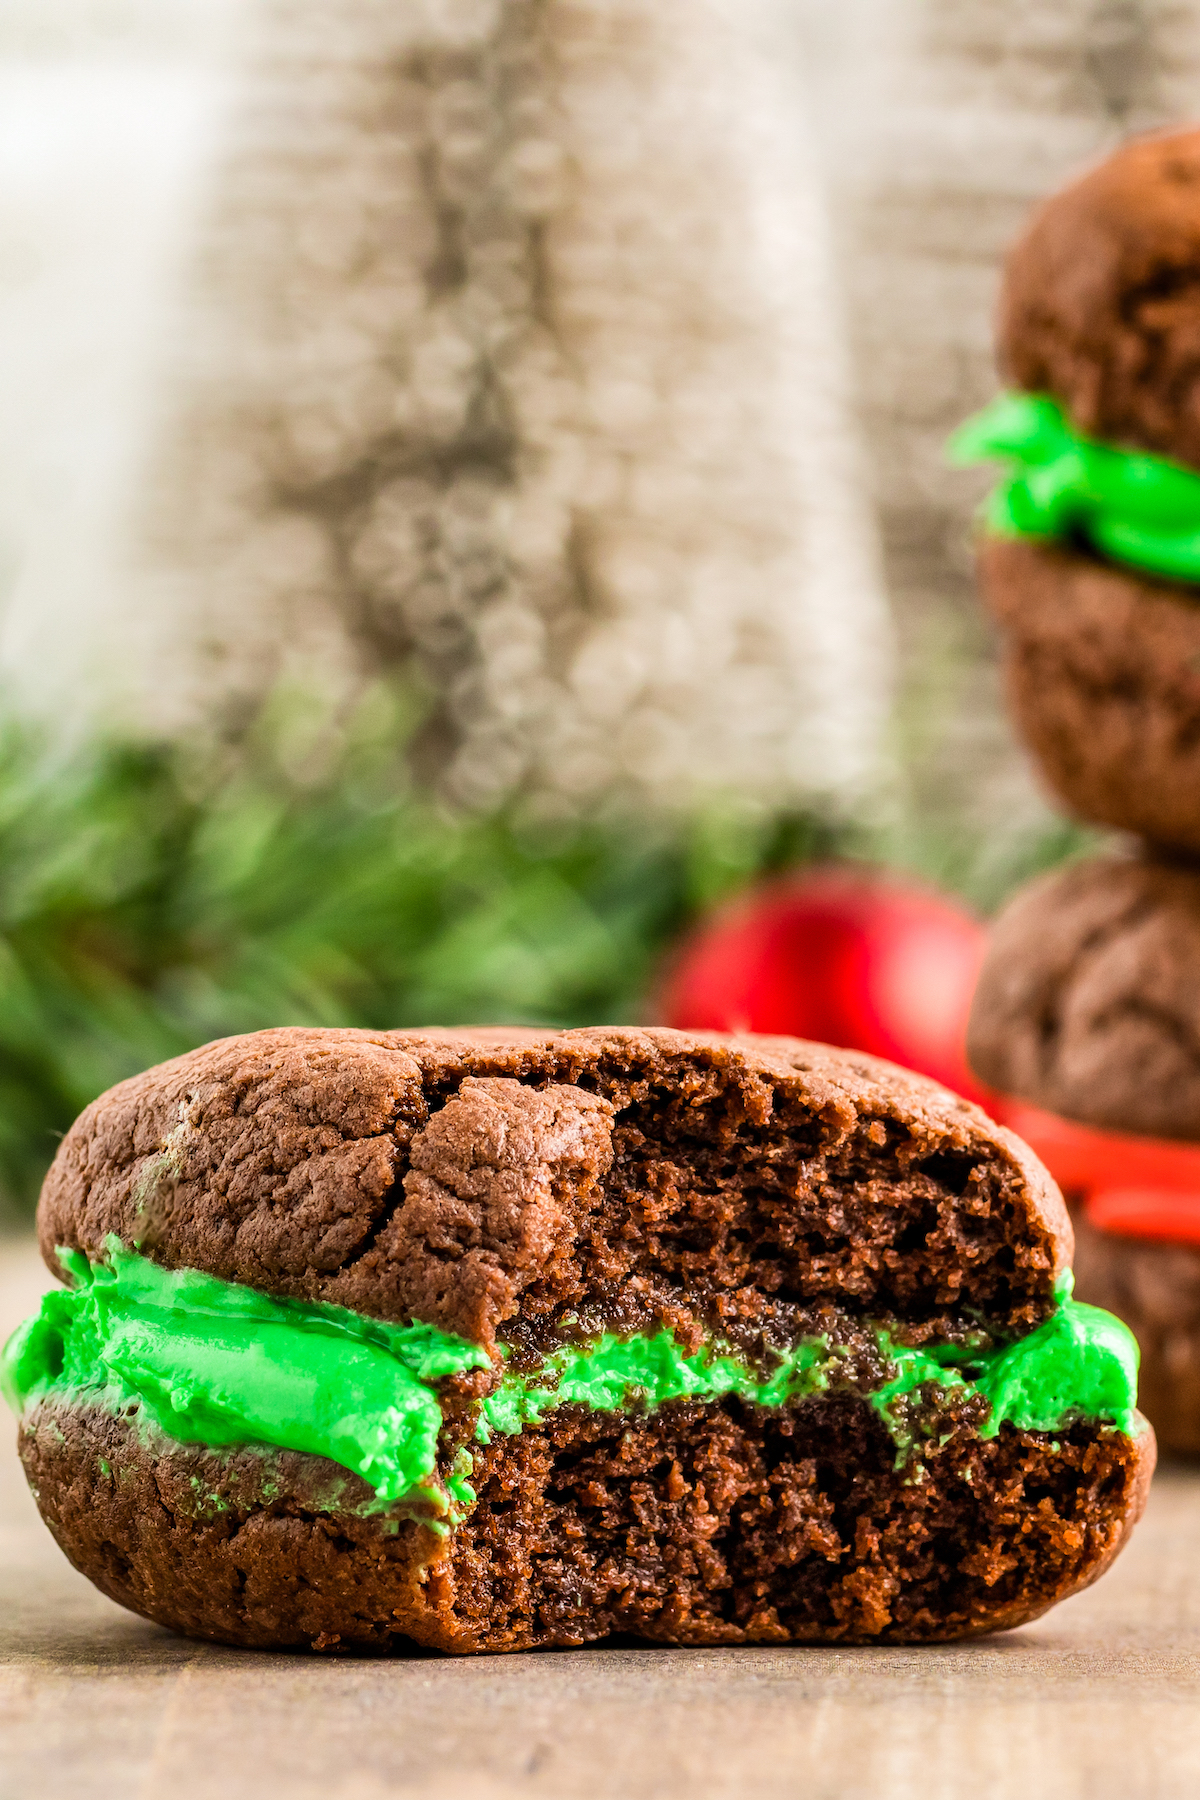 A soft, chocolate sandwich cookie with green marshmallow filling. One bite has been taken from the cookie.